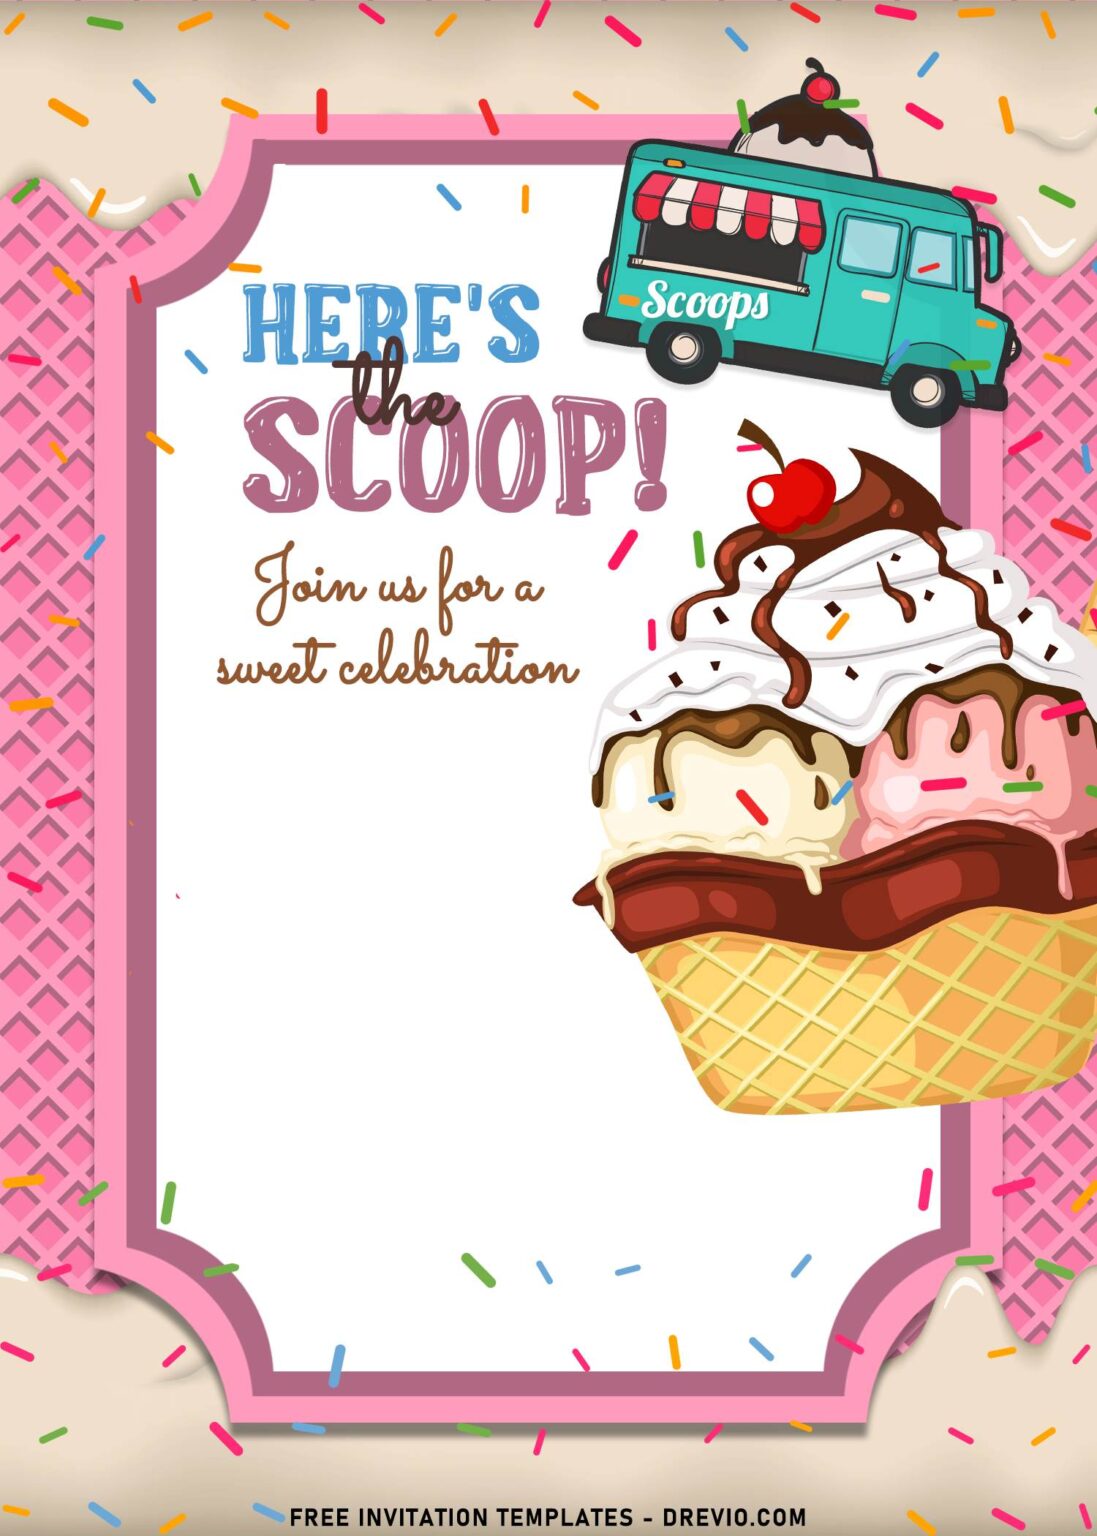 9 Ice Cream Party Invitation Templates For Kids Download Hundreds 